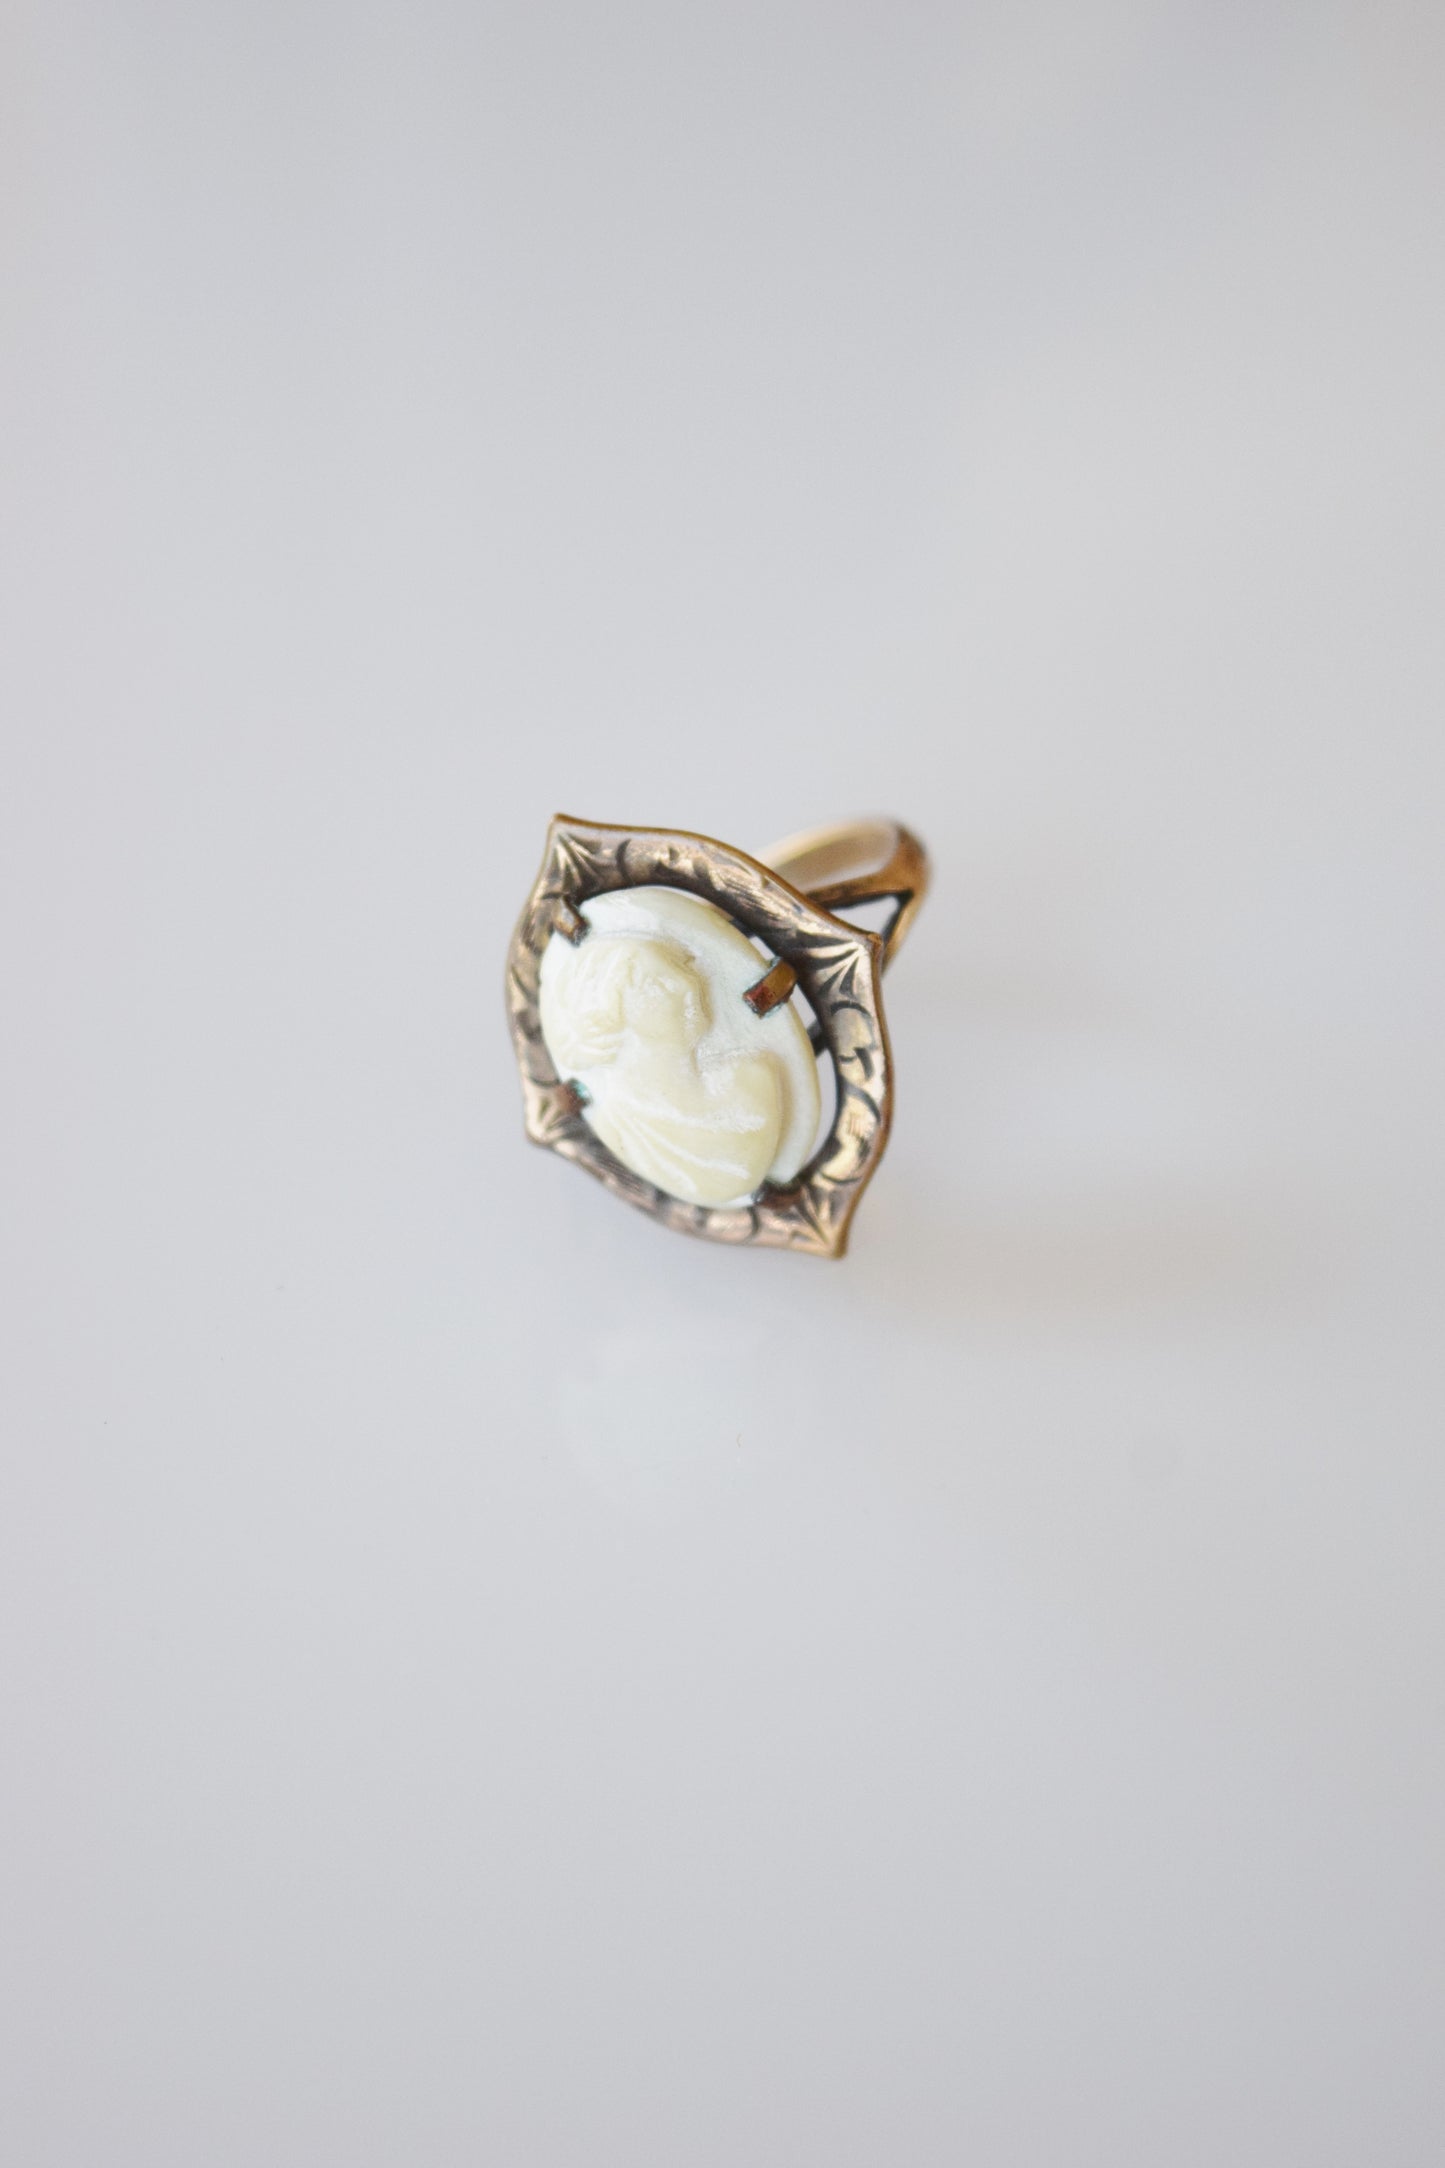 1930s Victorian Revival Cameo Ring